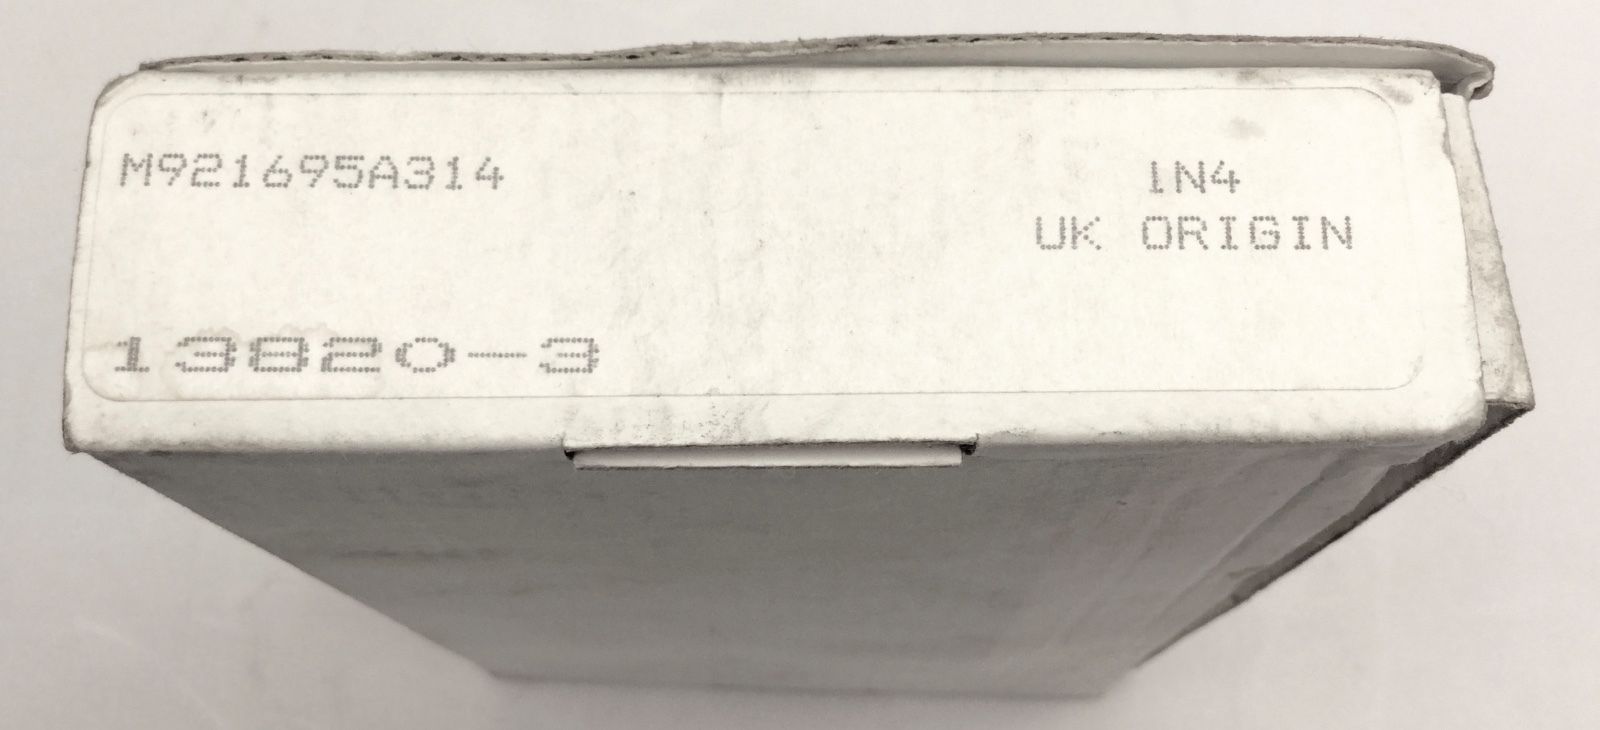 SIEMENS MOORE 13820-3 LINEAR TRANSDUCER PROBE 5 PIN CONNECTOR NEW IN BOX DIAGNOSTIC ULTRASOUND MACHINES FOR SALE